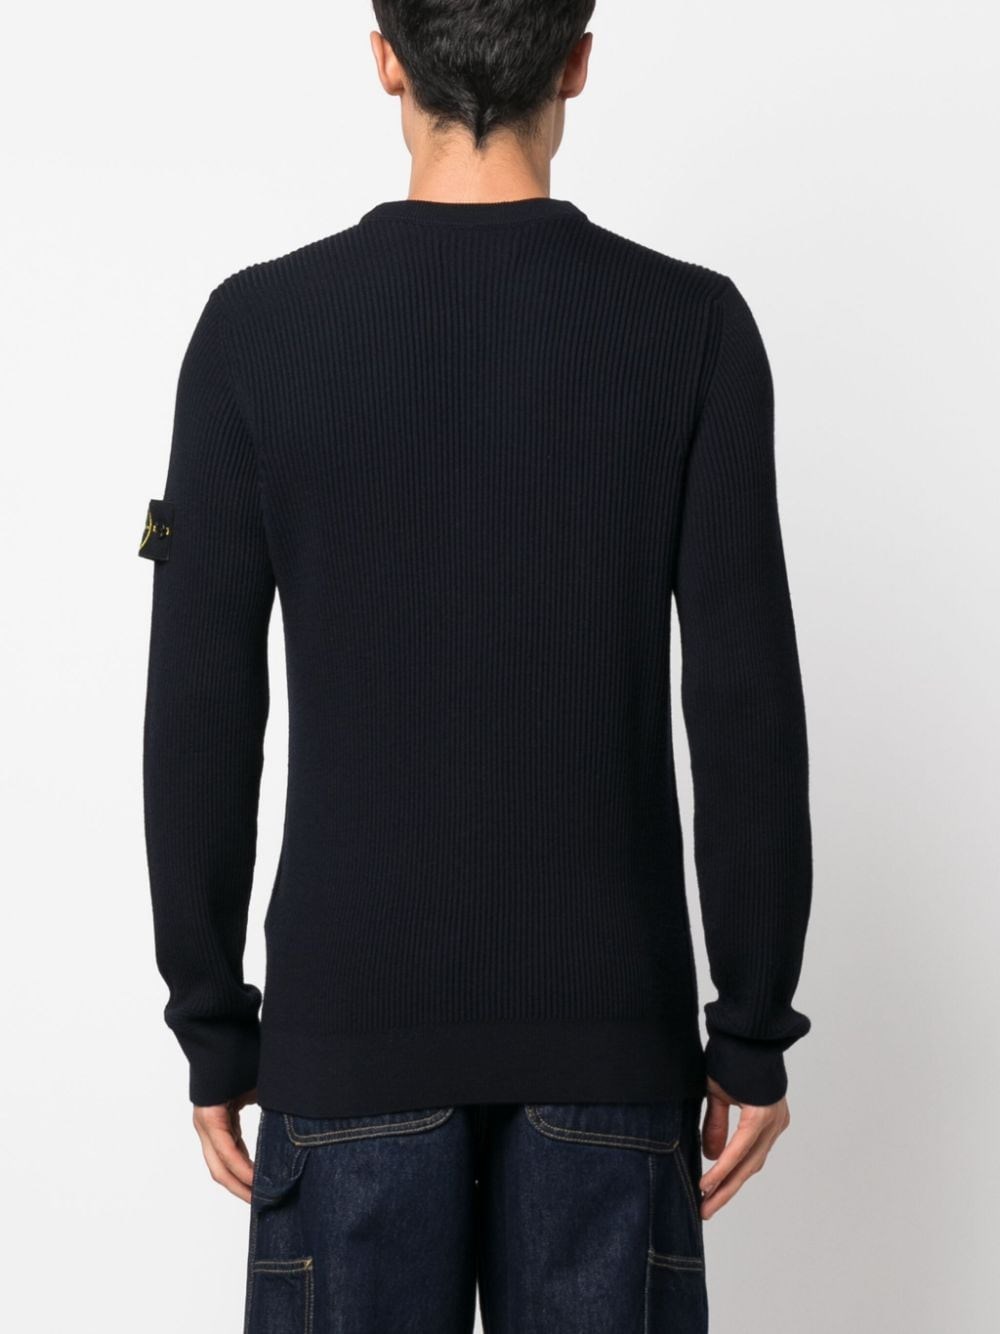 stone island PULLOVER available on montiboutique.com - 57160